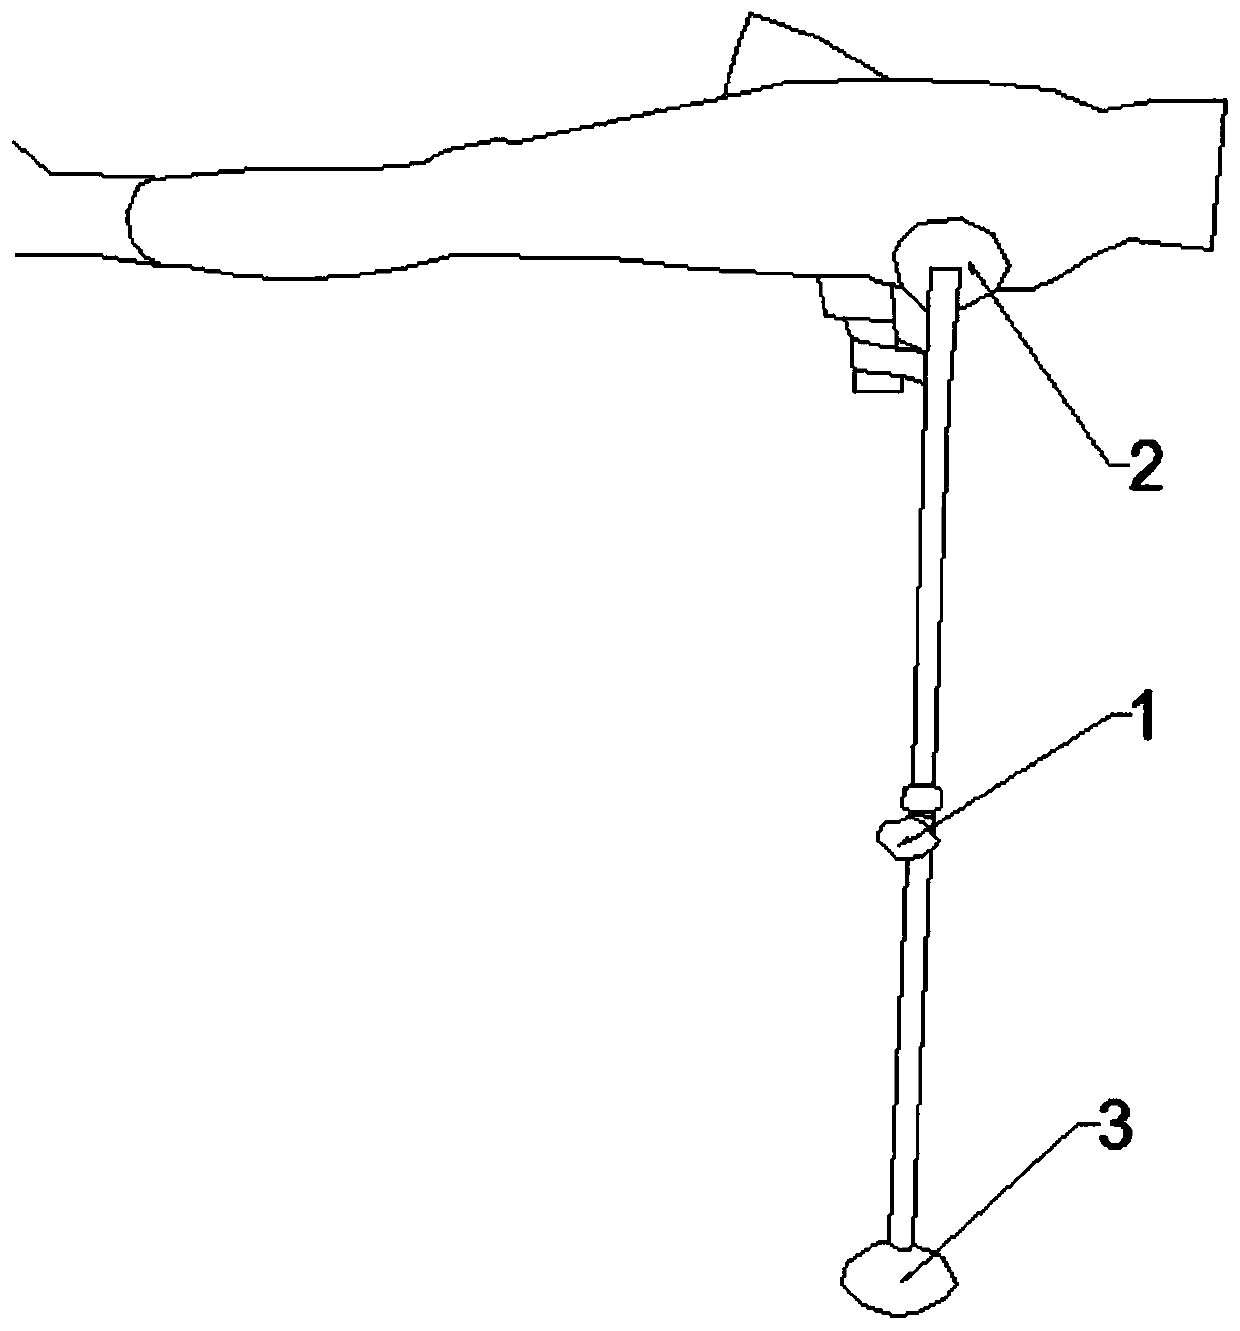 Brace supporting device based on closed reduction of hip joint fracture